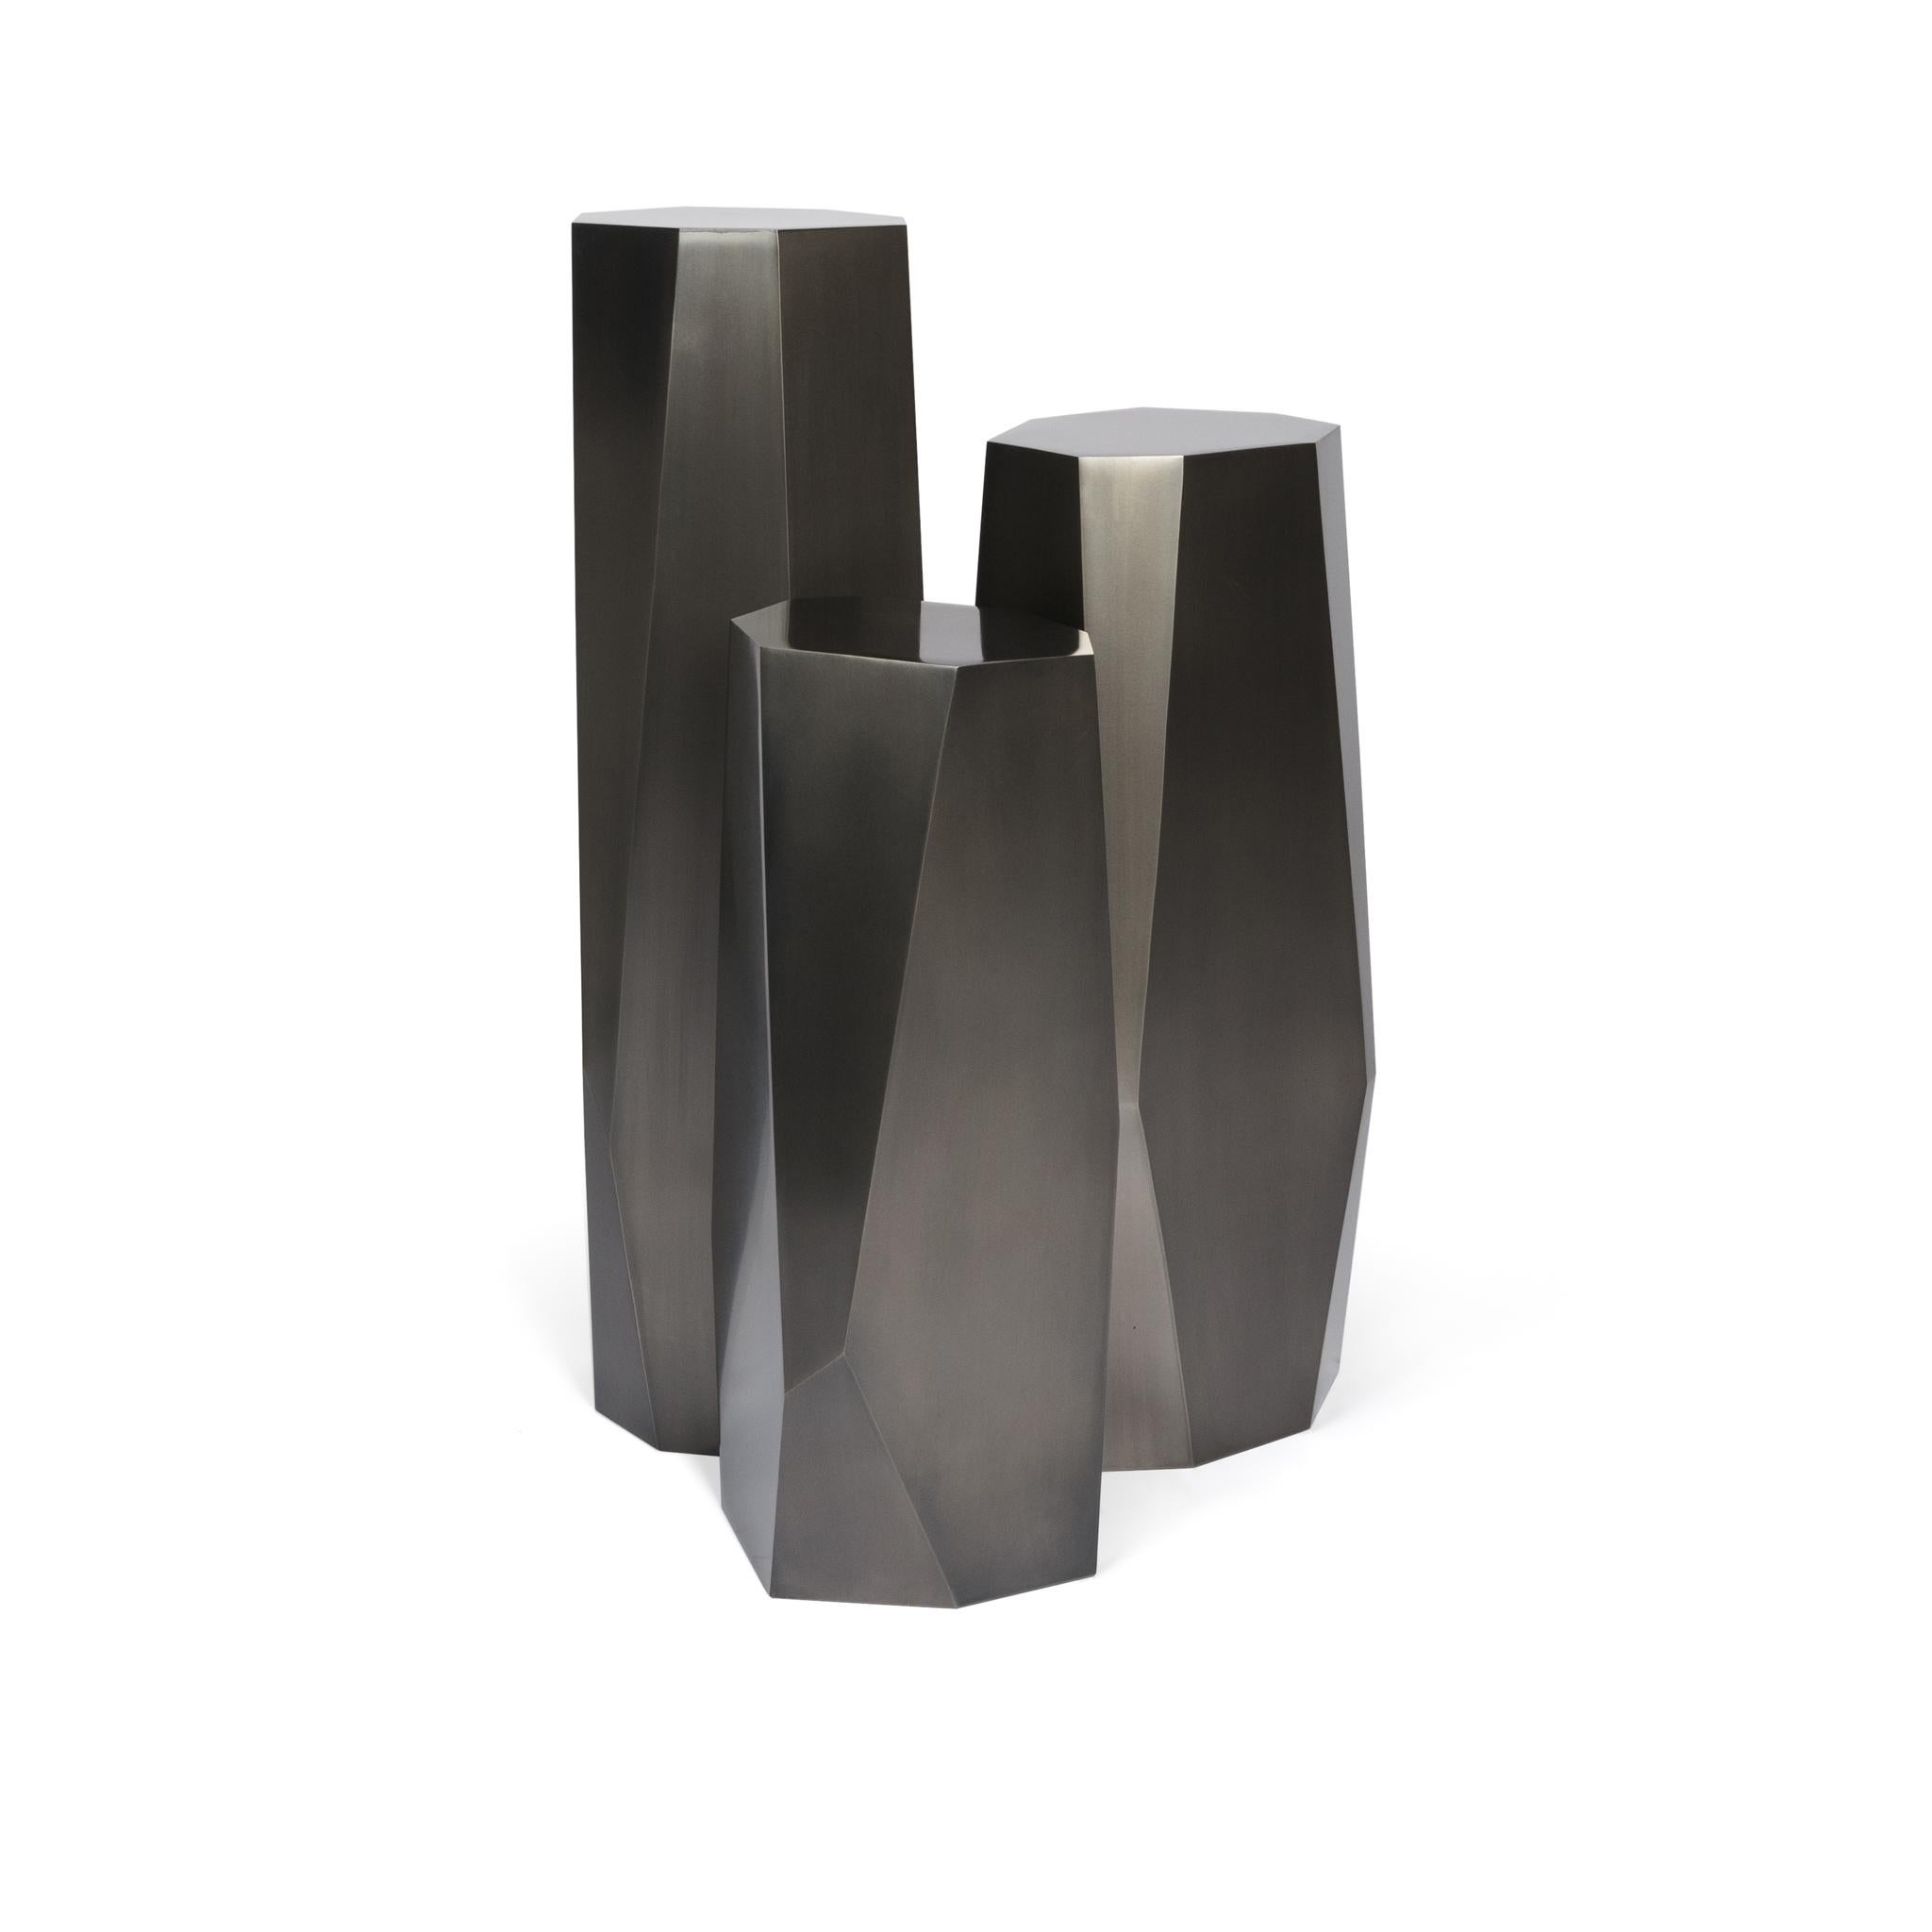 The hex column set is a three-piece elegant geometric pedestal set. The steel sculptural and hand applied finish make this set an interesting conversation piece. Its geometric design reflects light and illuminates light and shadows from different